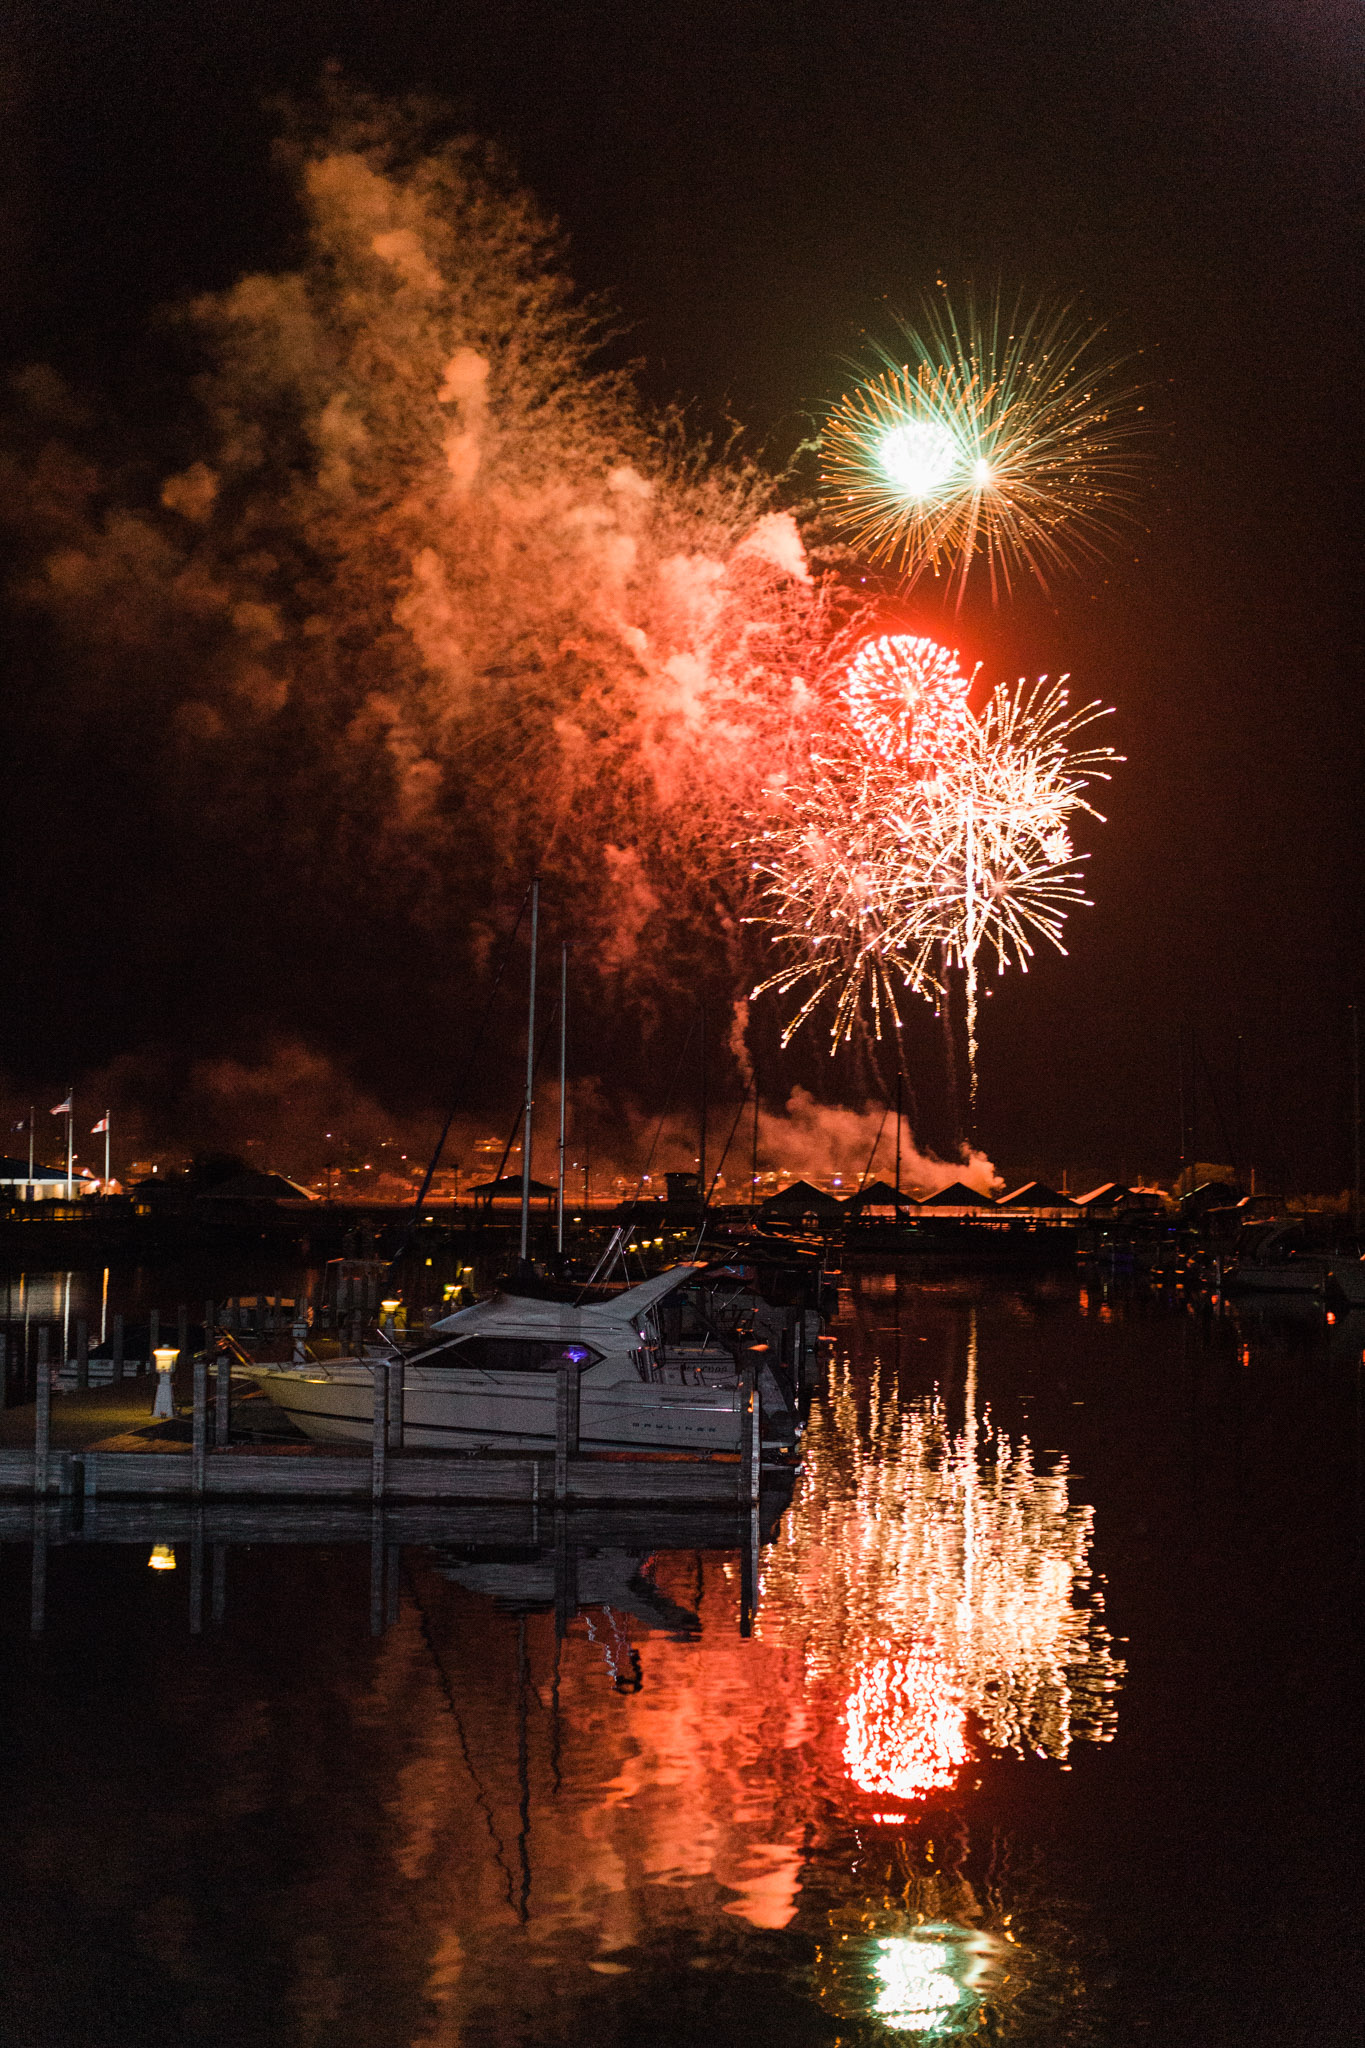 Fireworks over the bay to finish off a Mackinac wedding day.